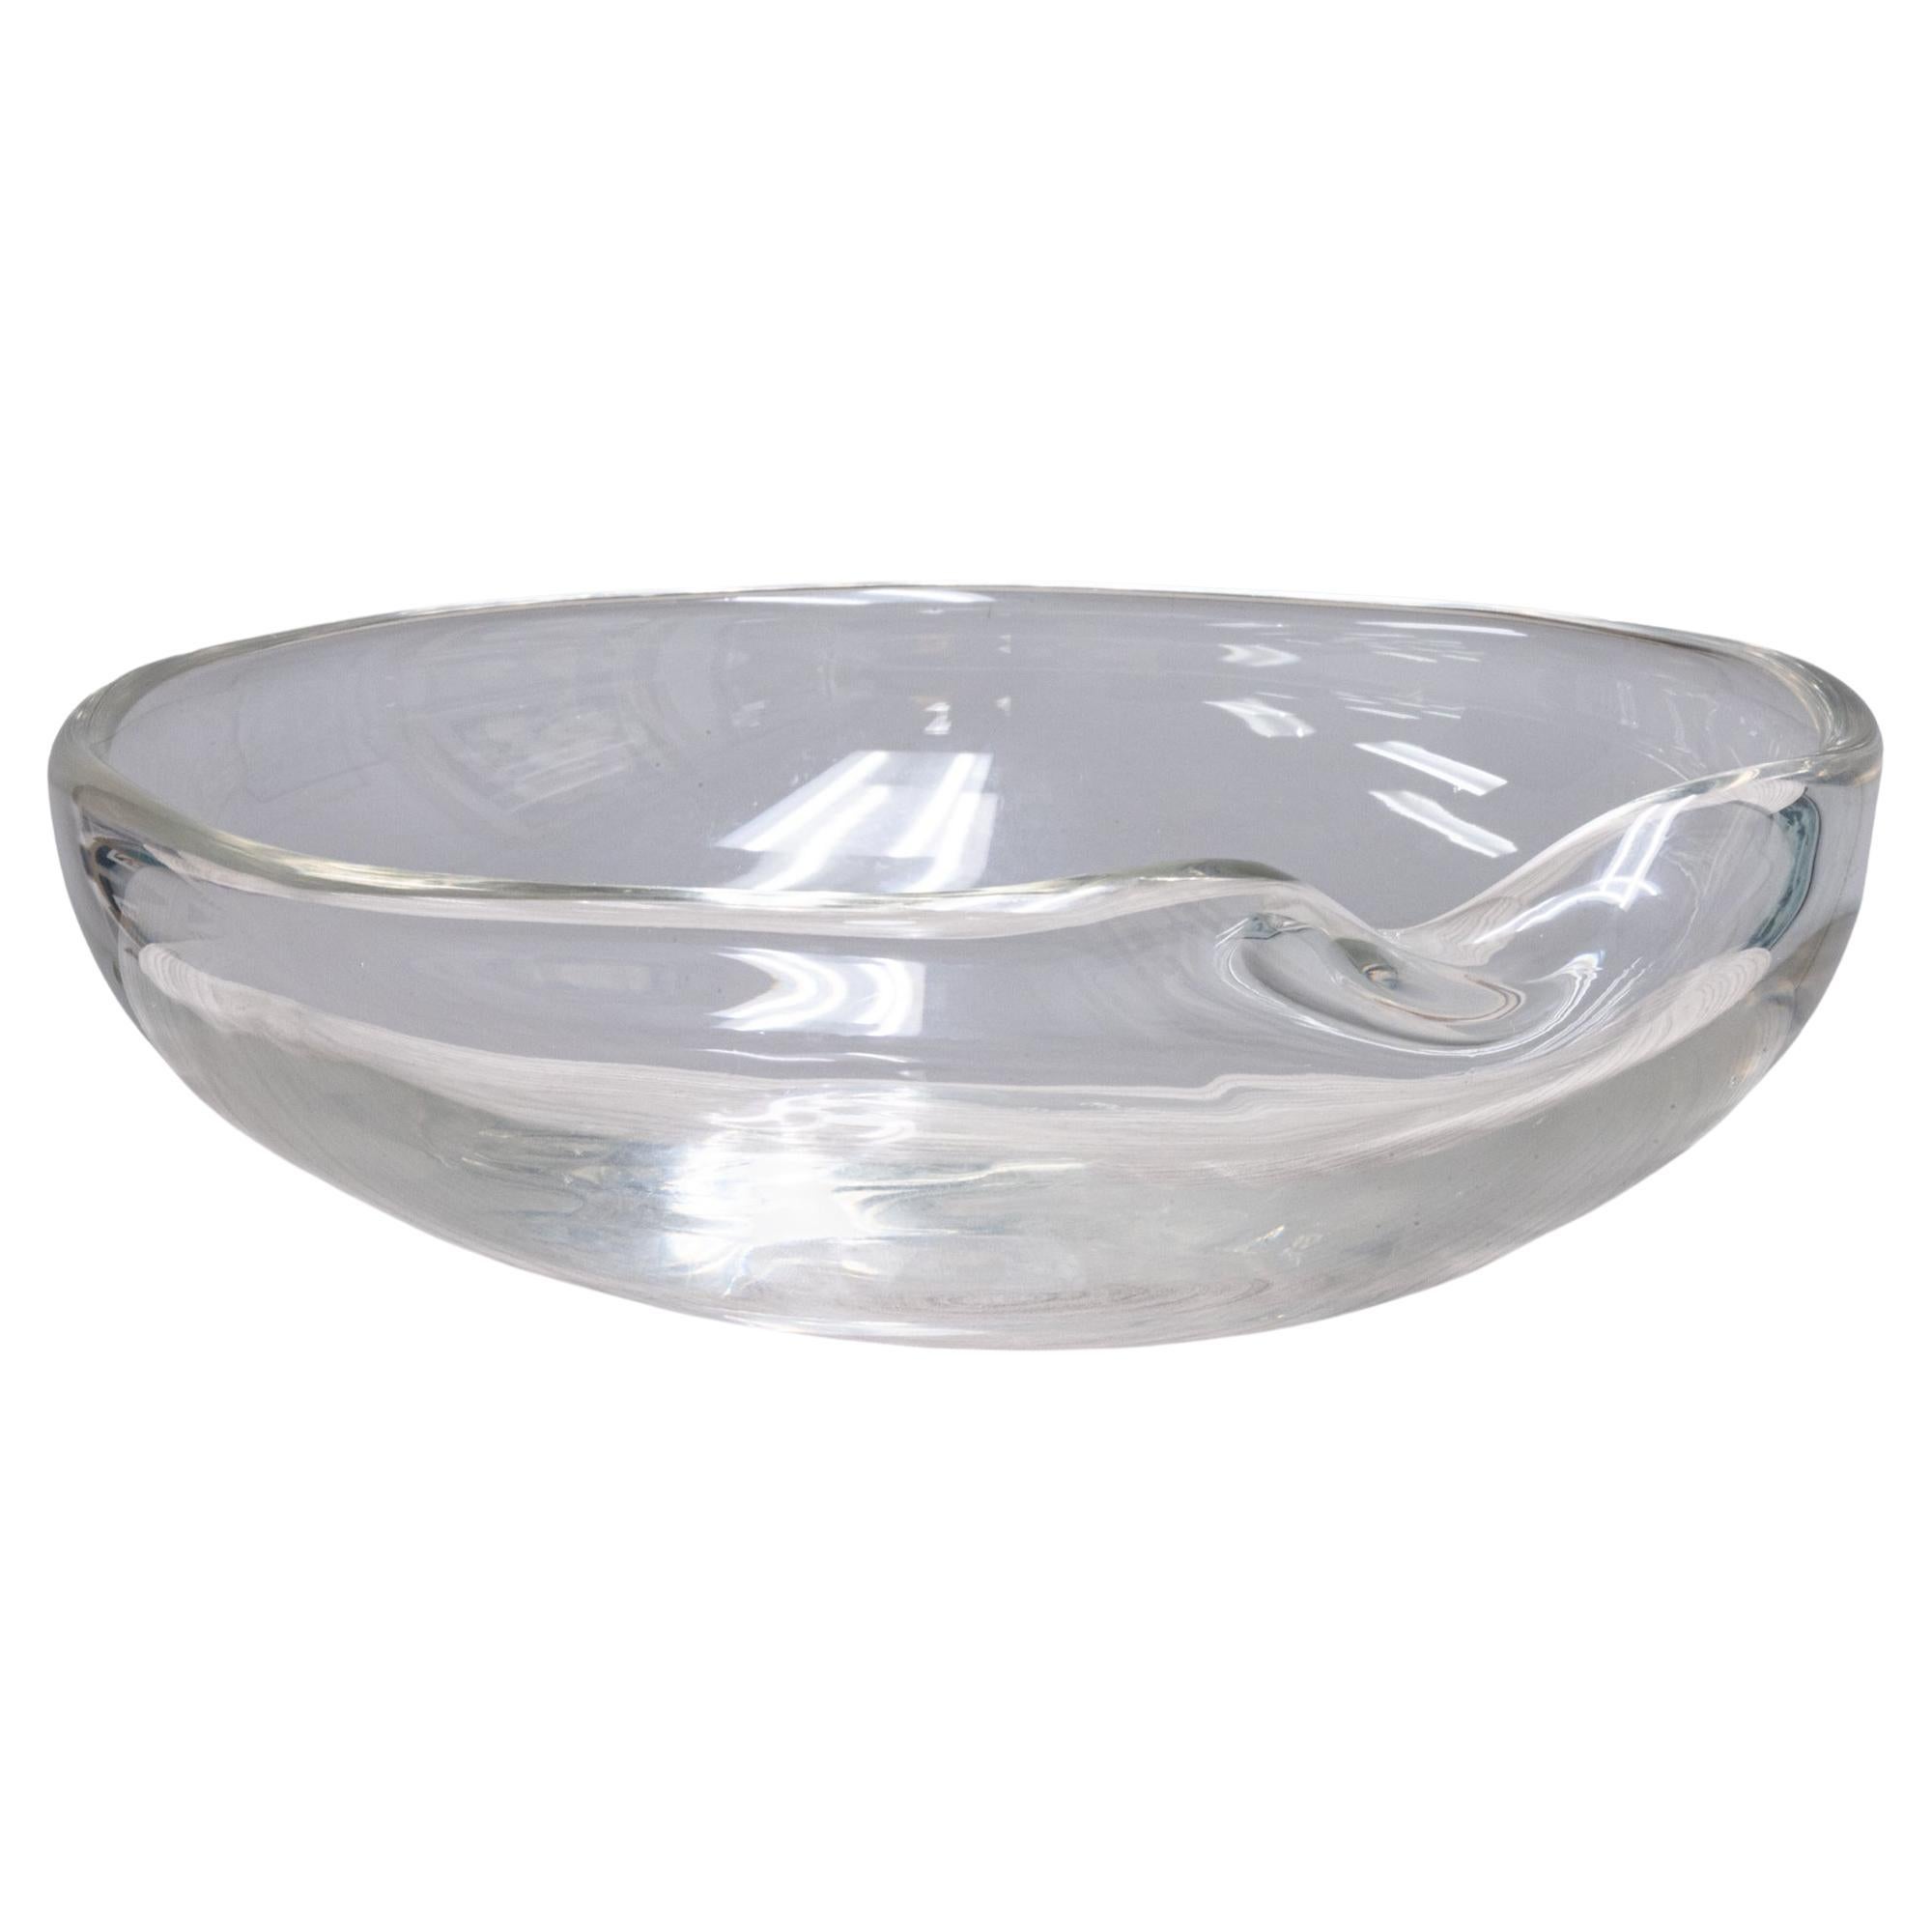 Elsa Peretti for Tiffany and Co Thumbprint Bowl Contemporary Modern Italy For Sale